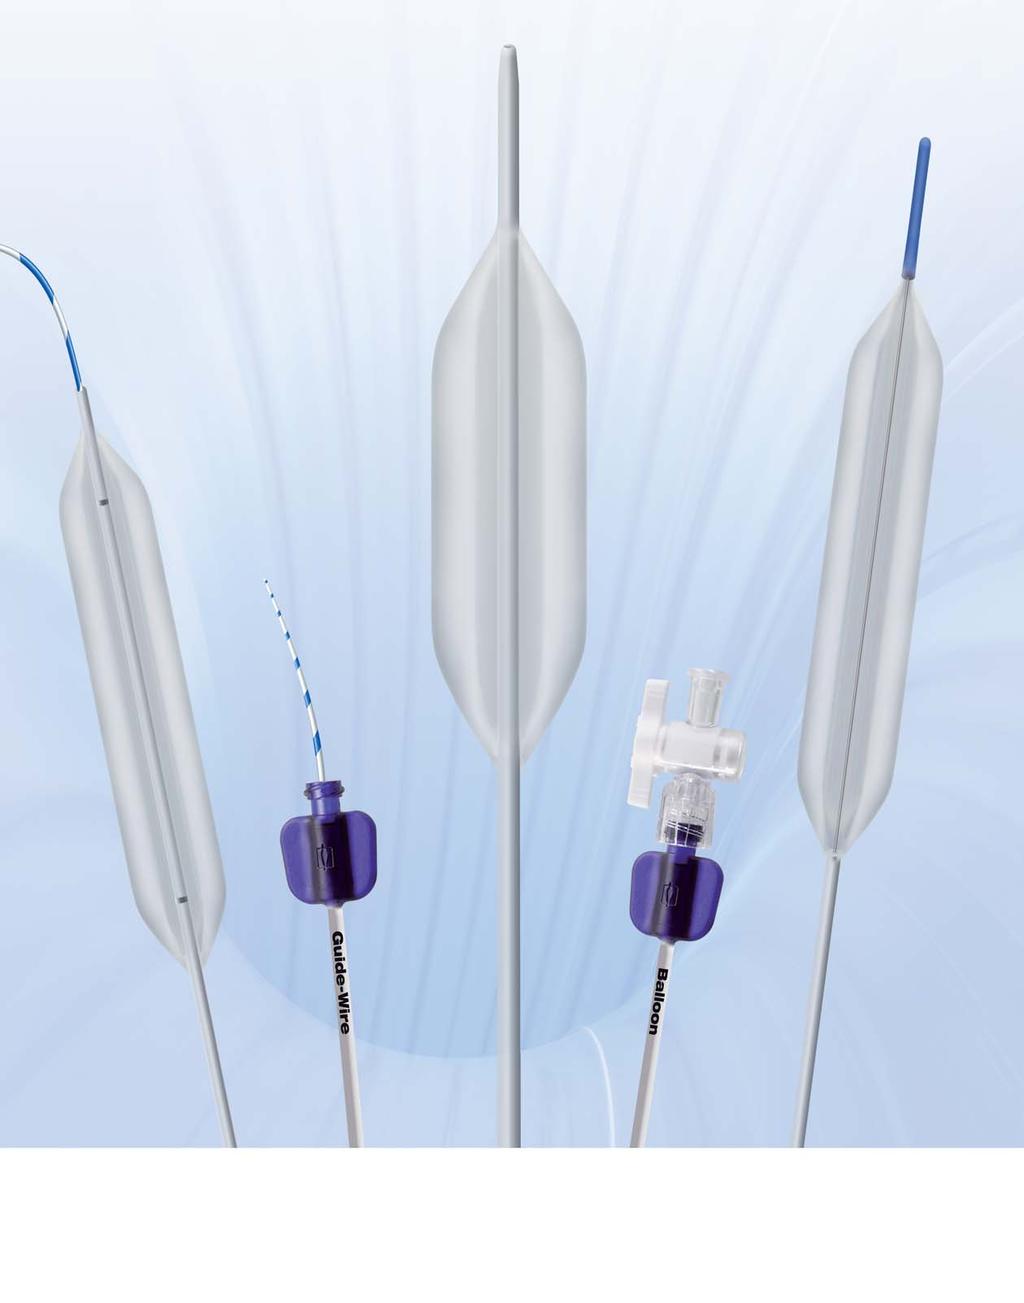 ExPander Dilation Balloons Single Use ExPander Versions with Integrated Stabilization Wire and Atraumatic Flexible Tip Facilitate Usage within Anatomy Cases, which not Accept the Placement of a Guide